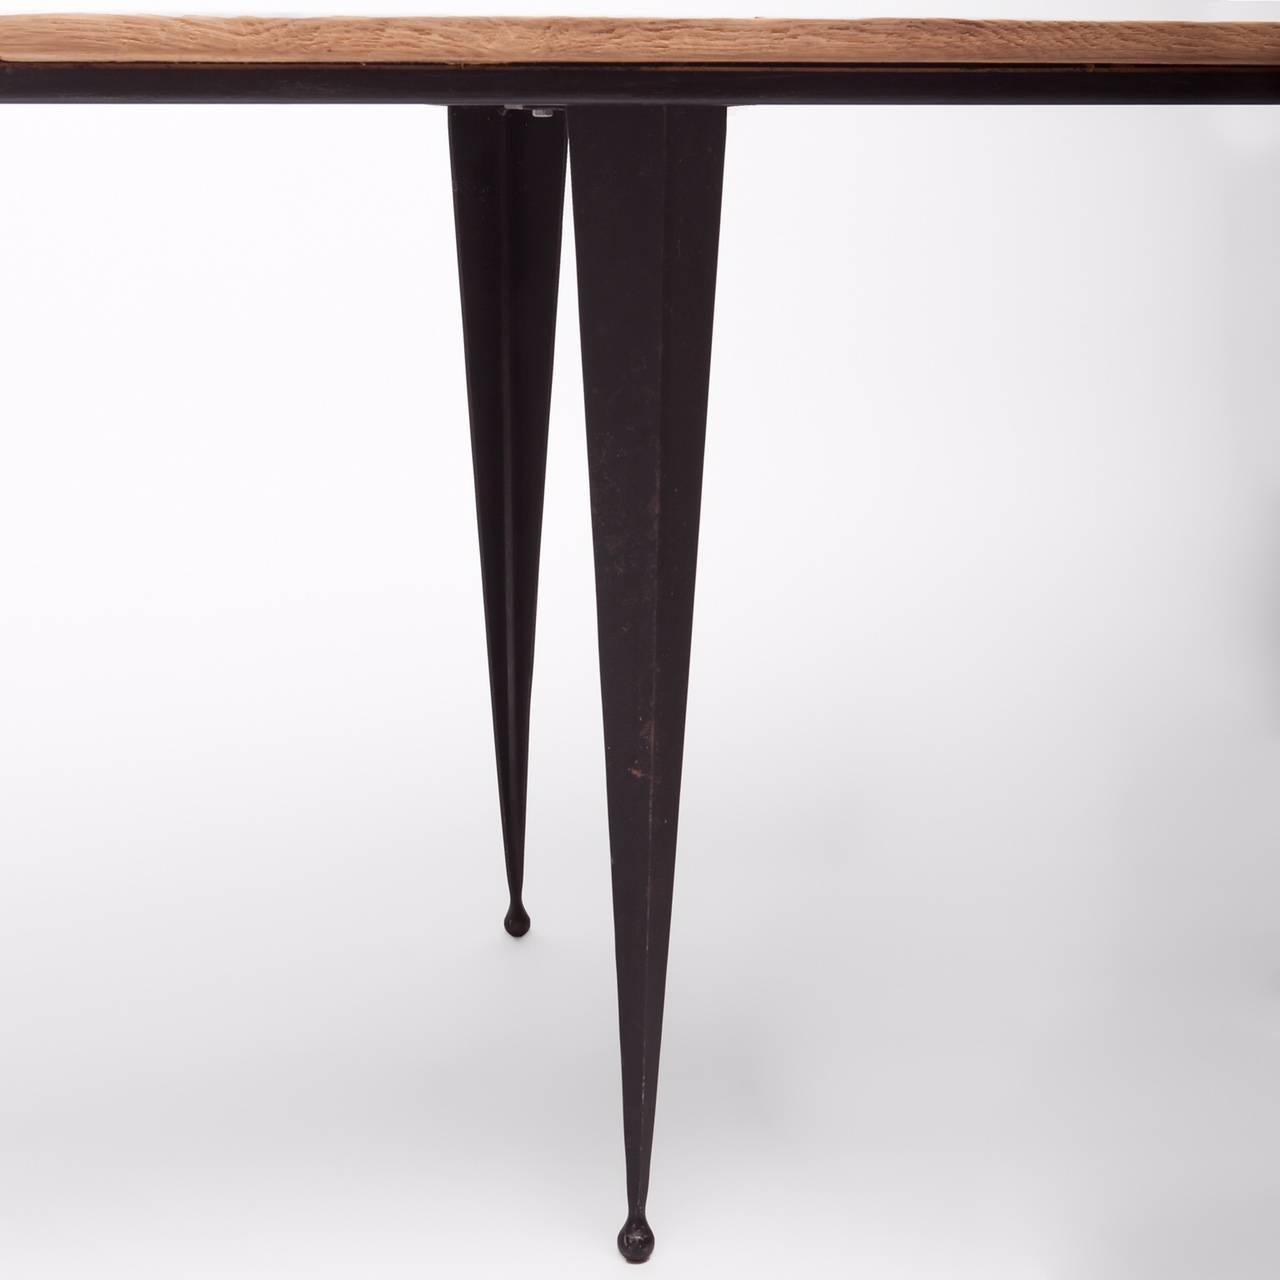 American Made to Order Reclaimed Oak Top Table with Tapered Black Iron Legs